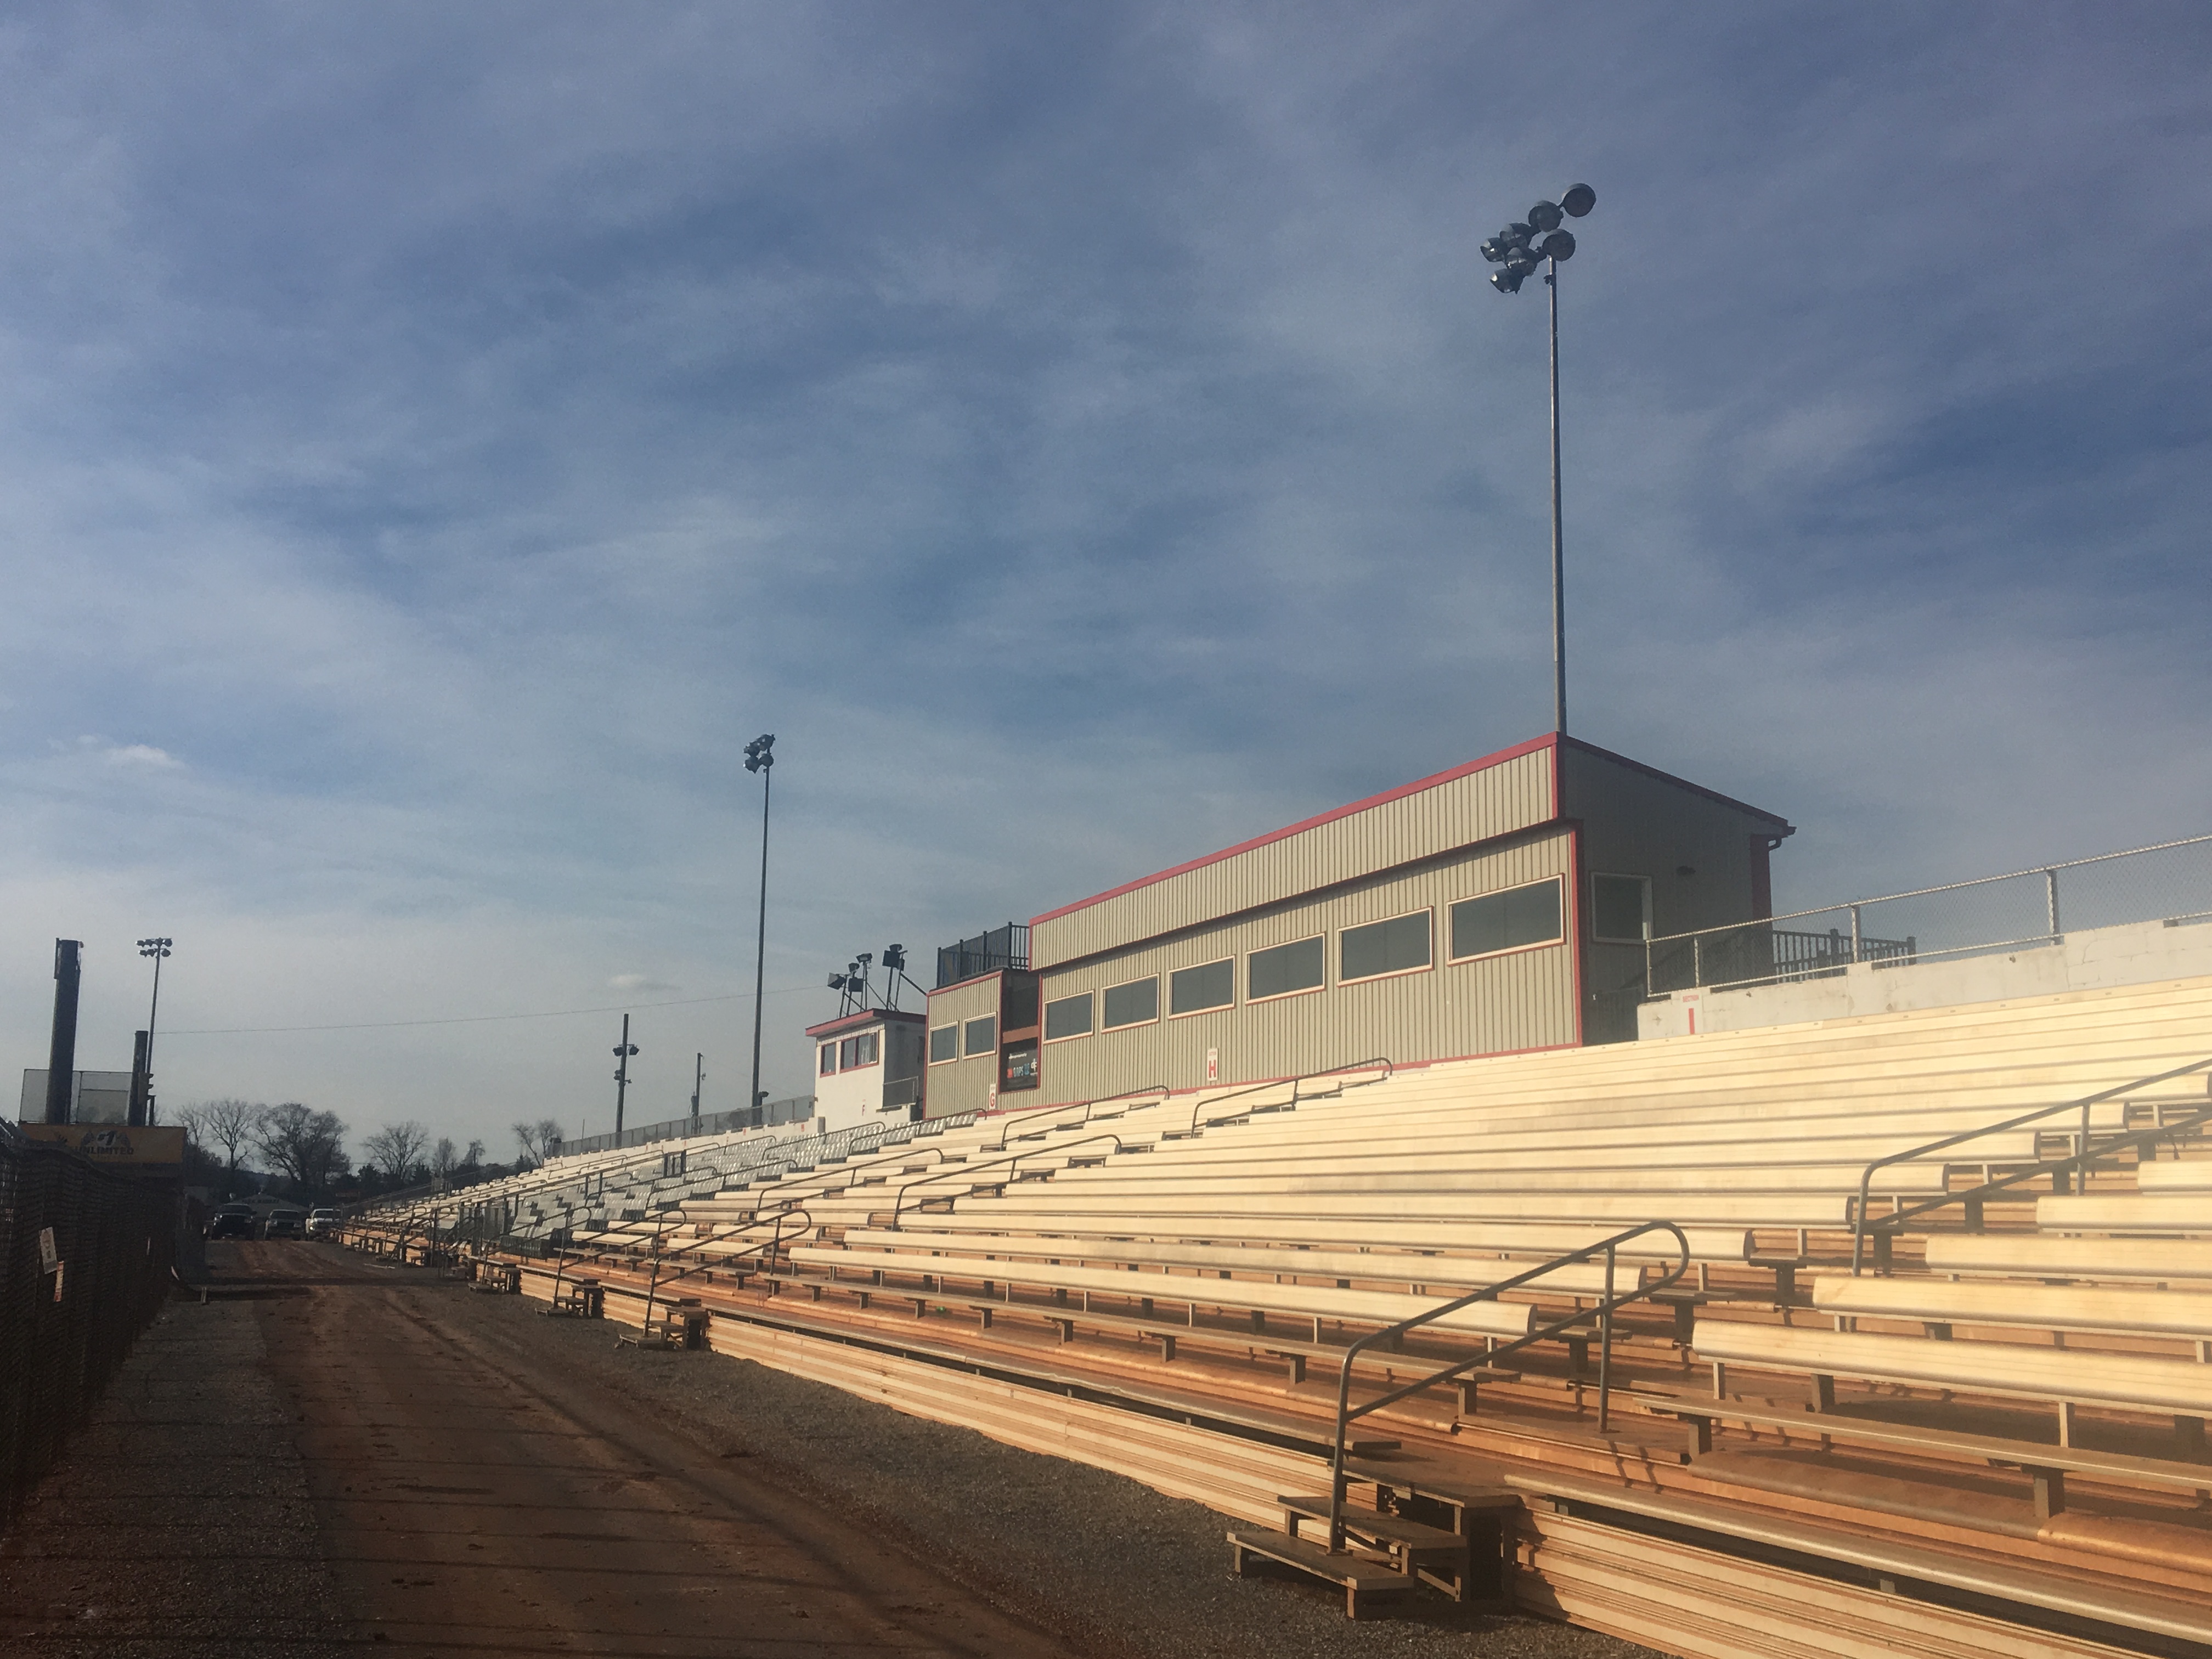 BAPS Motor Speedway adds Musco Lights, continues six-figure offseason projects